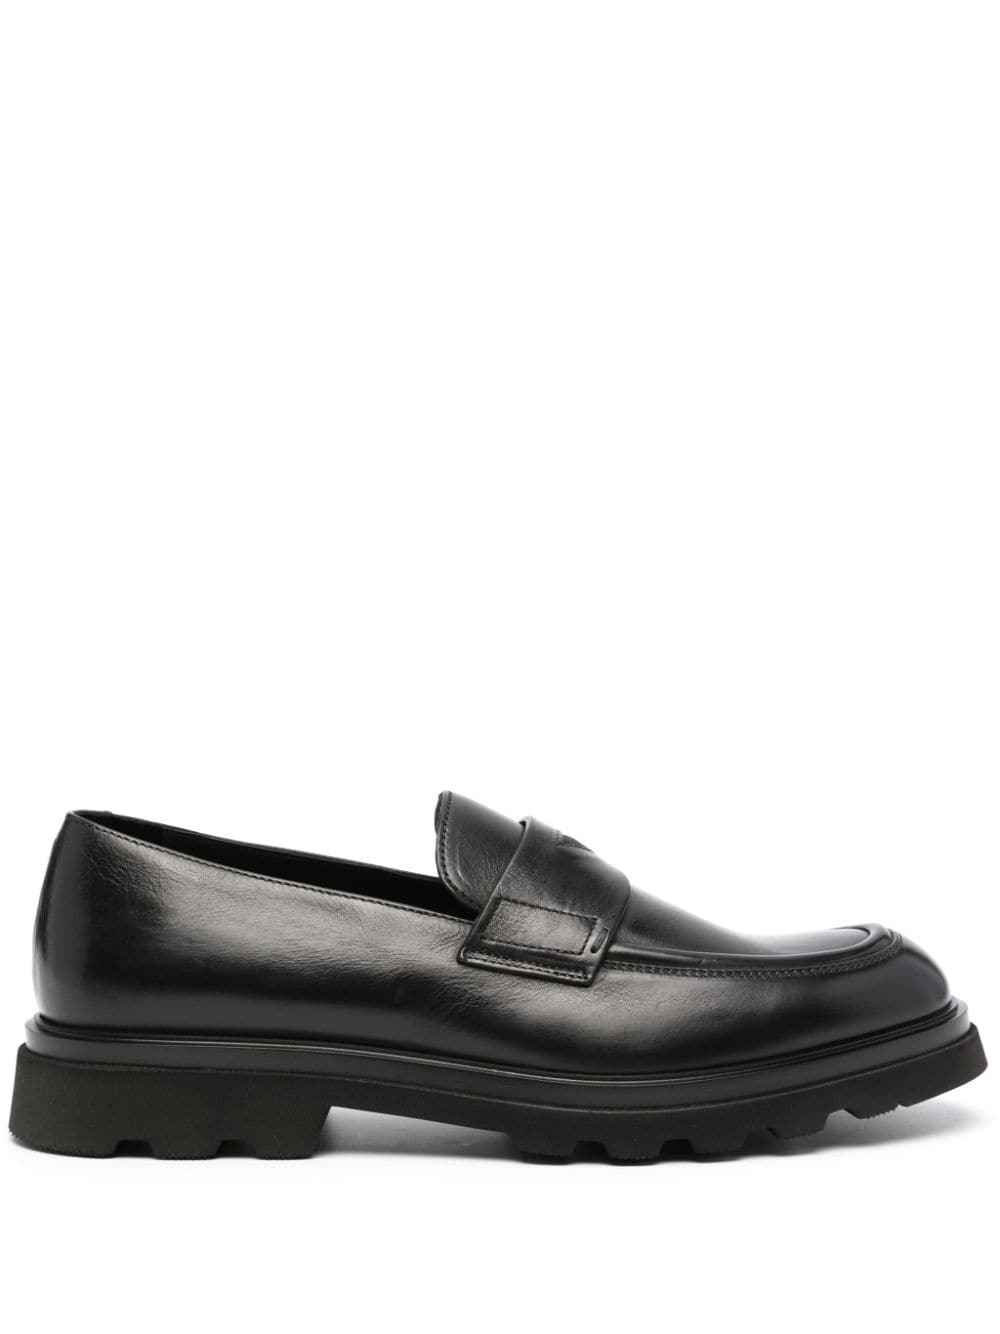 Doucal's round-toe leather loafers - Black von Doucal's